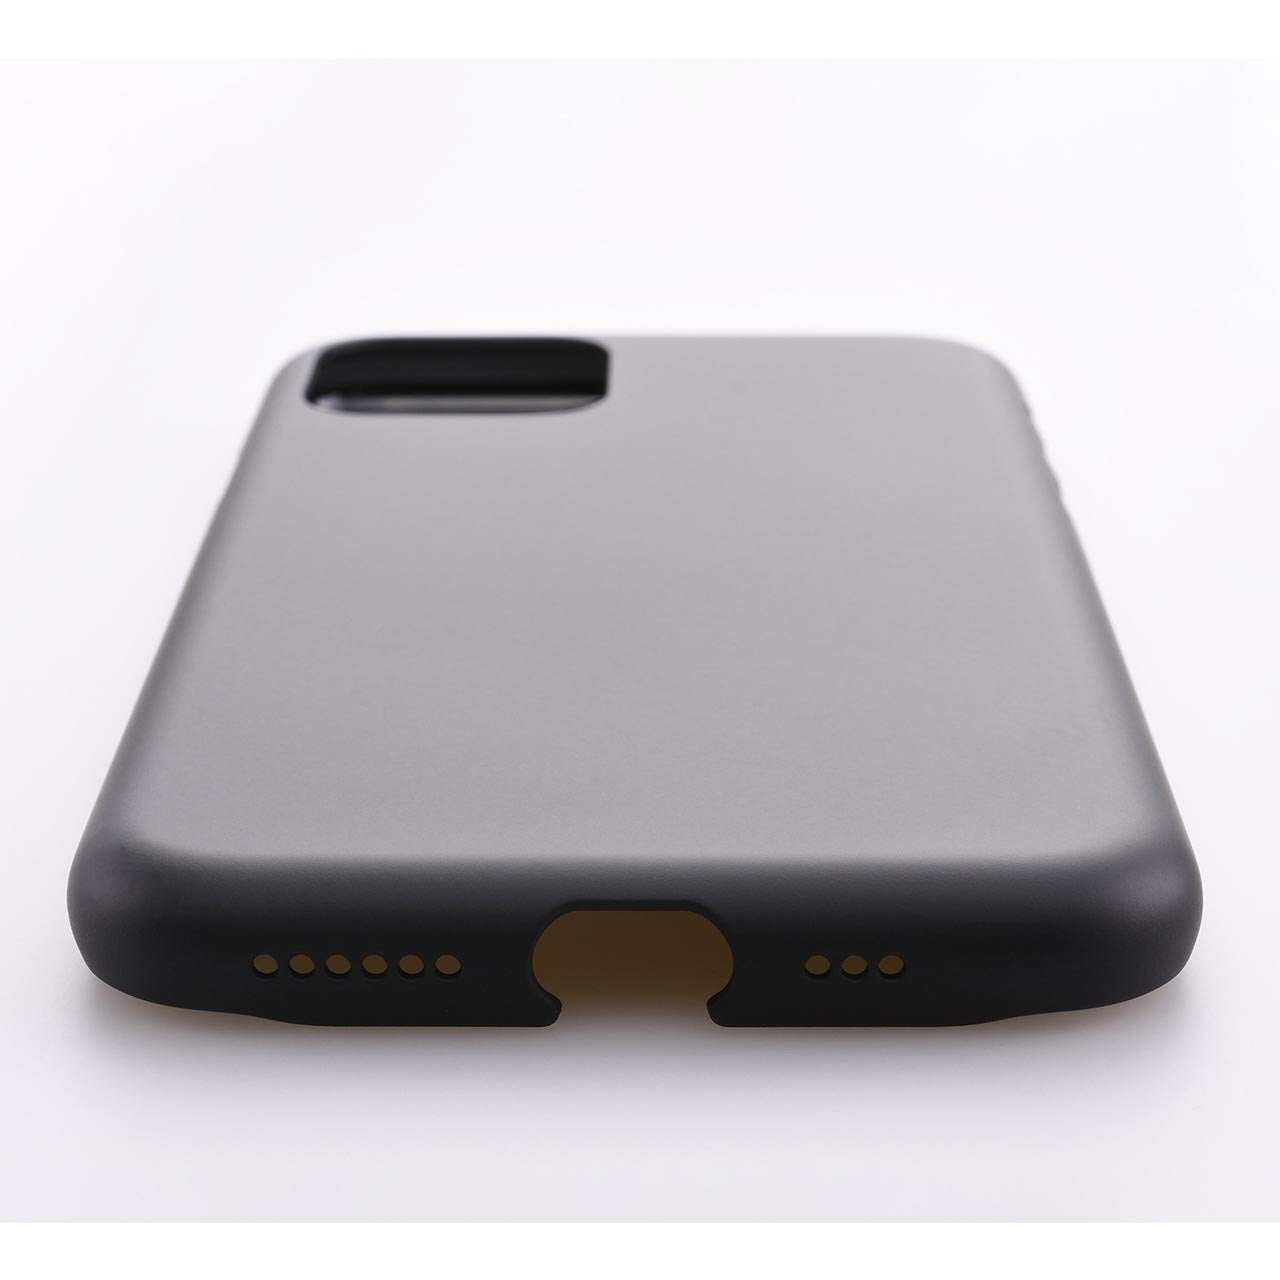 Air Jacket for iPhone 11 Pro - Rubberised Black